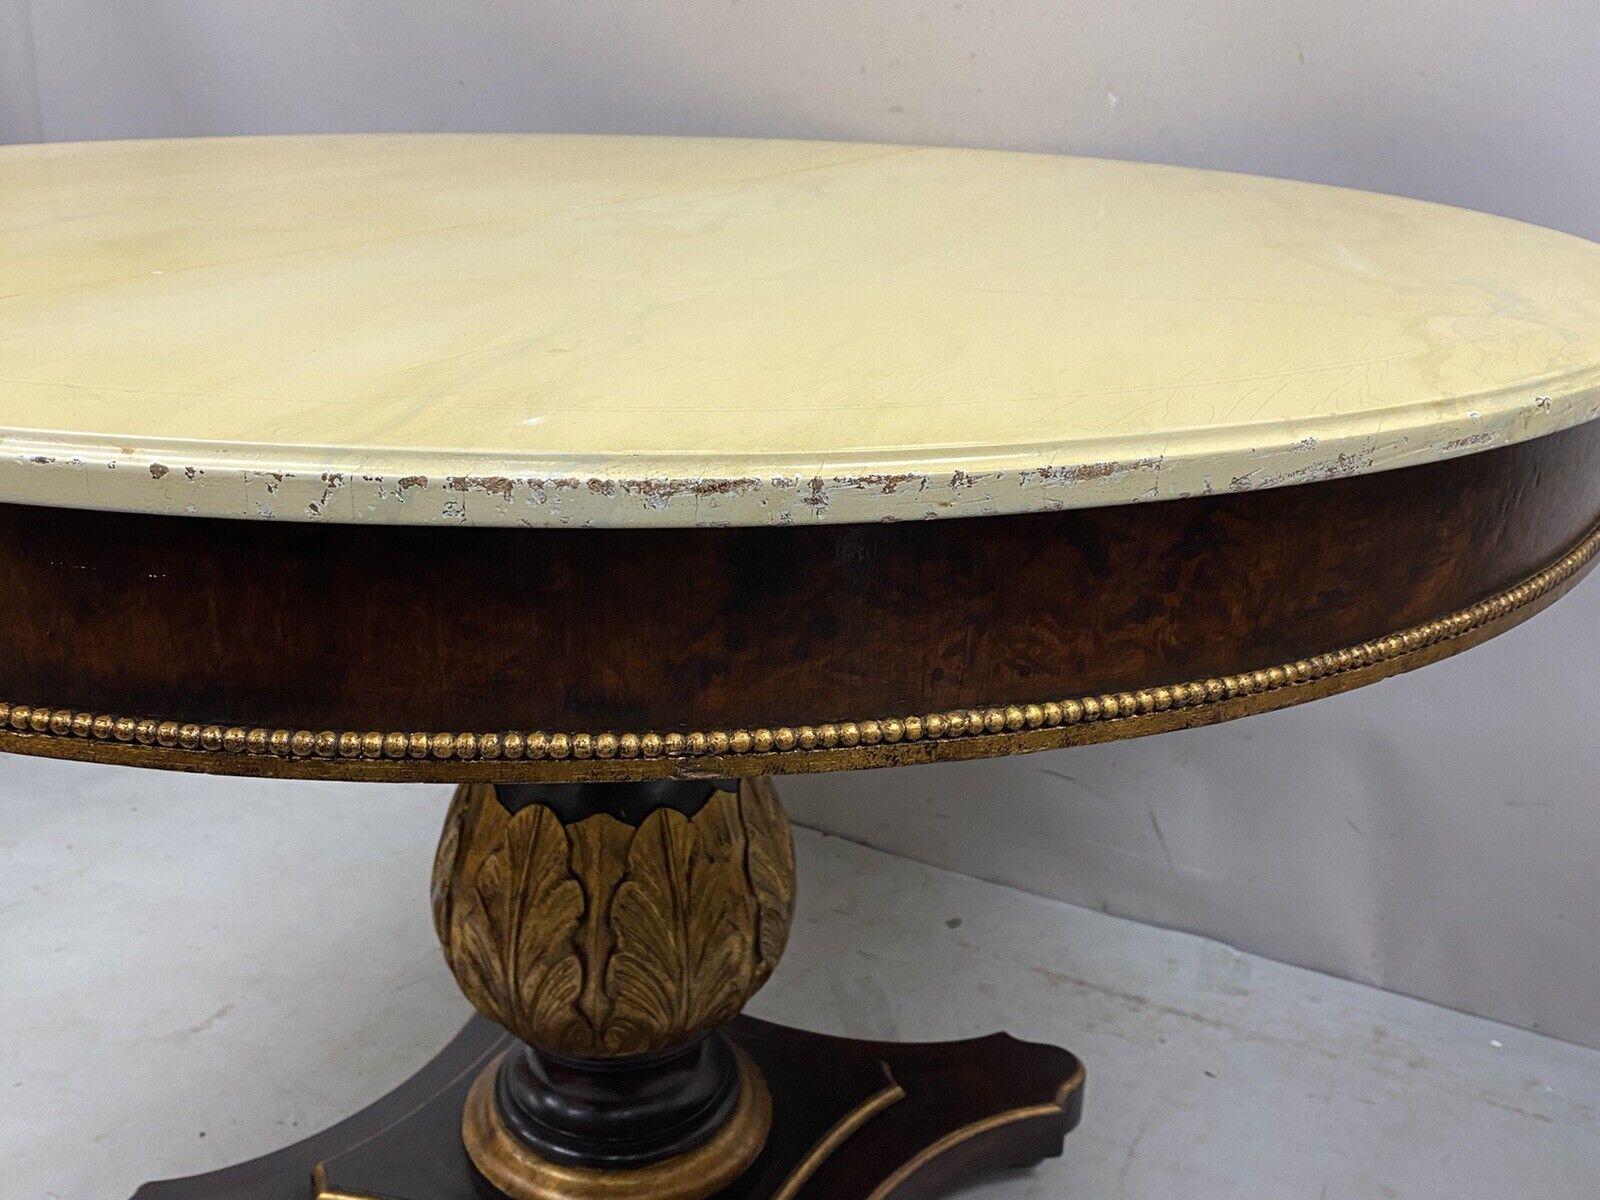 Vintage Italian Regency Style Pedestal Base Round Dining Table Cream Lacquer Top For Sale 3